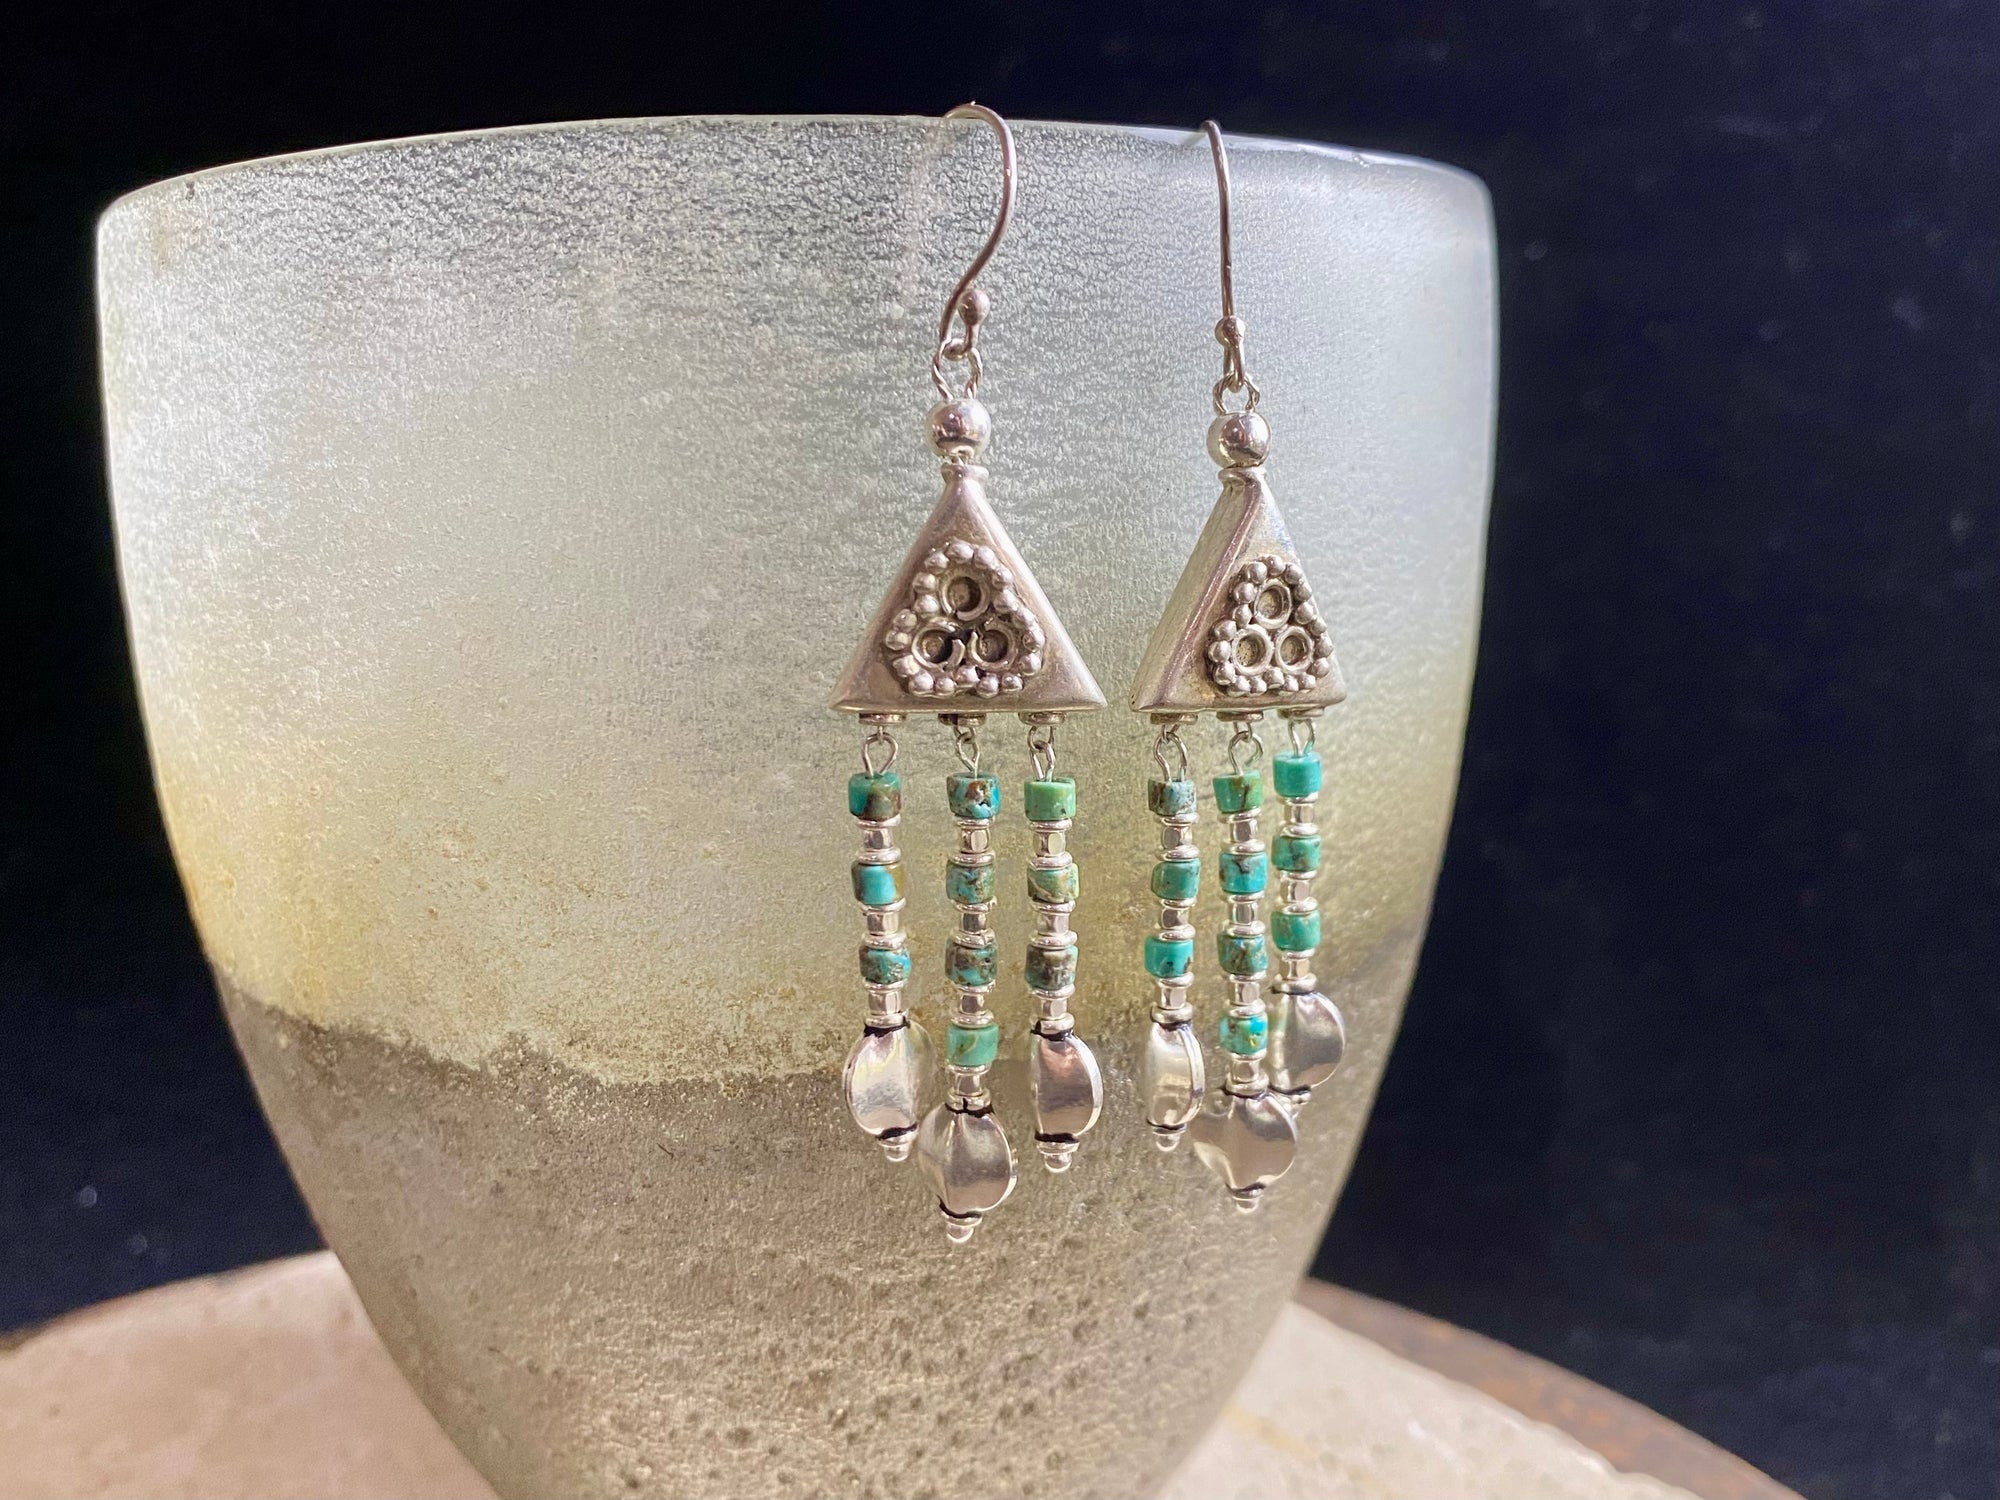 Three strand chandelier earrings crafted from natural Hubei turquoise and sterling silver handmade chandelier pieces, detailing and hooks. Stunning and unique, with an ancient Roman look and feel. Measurements: Length approximately 7.5 cm